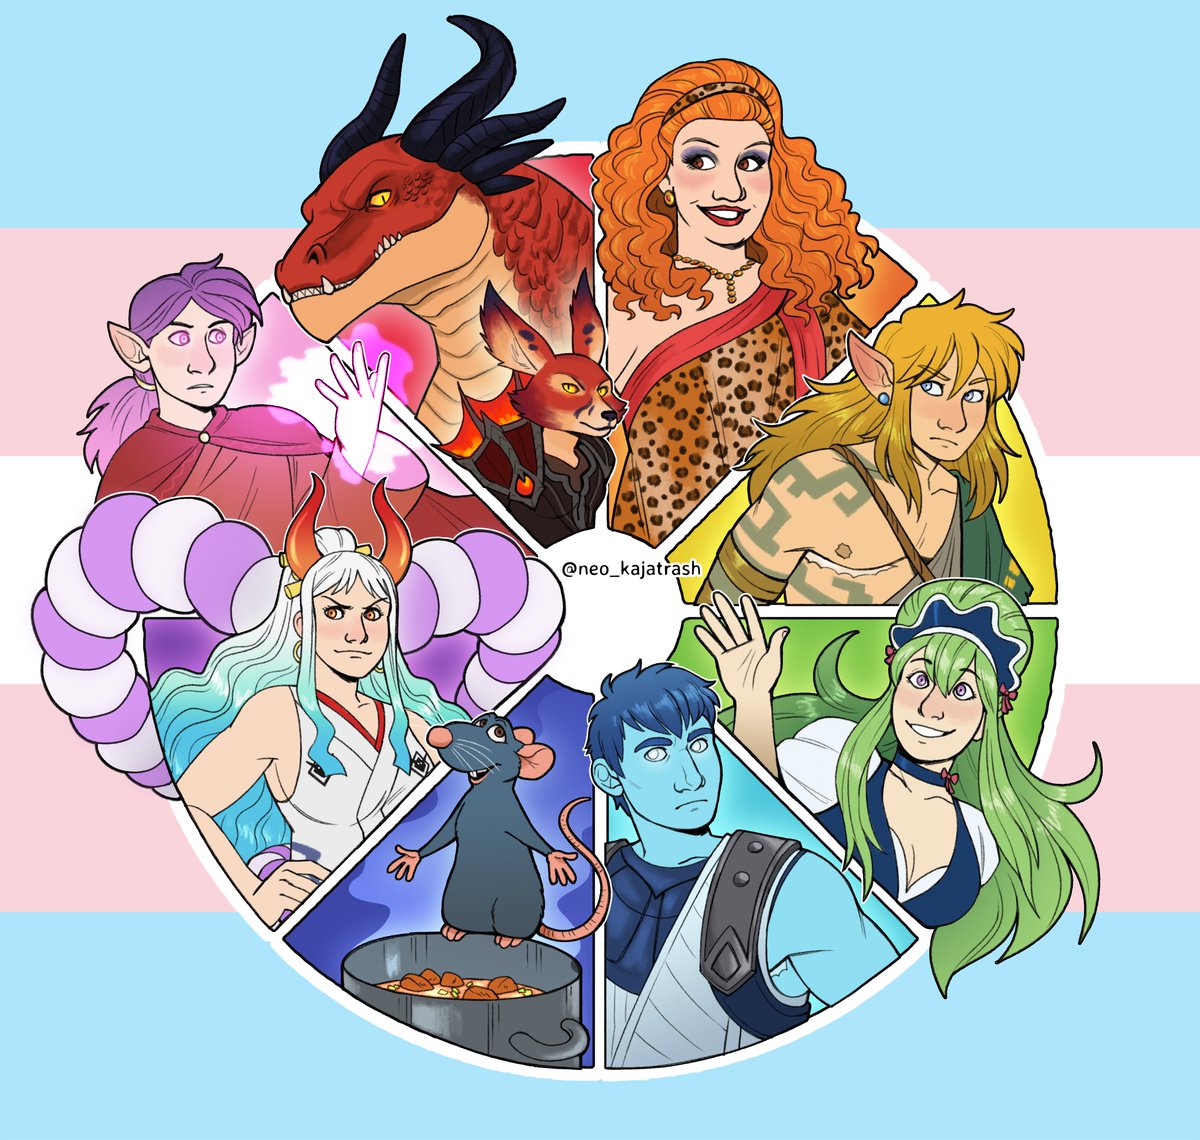 Ta-da! Here's my #colorwheelchallenge with trans and trans-headcanoned characters! I just wanted to put out some much-needed trans positivity. And thank you guys for the suggestions, I hope you like how it turned out! ^-^ 💖🏳️‍⚧️